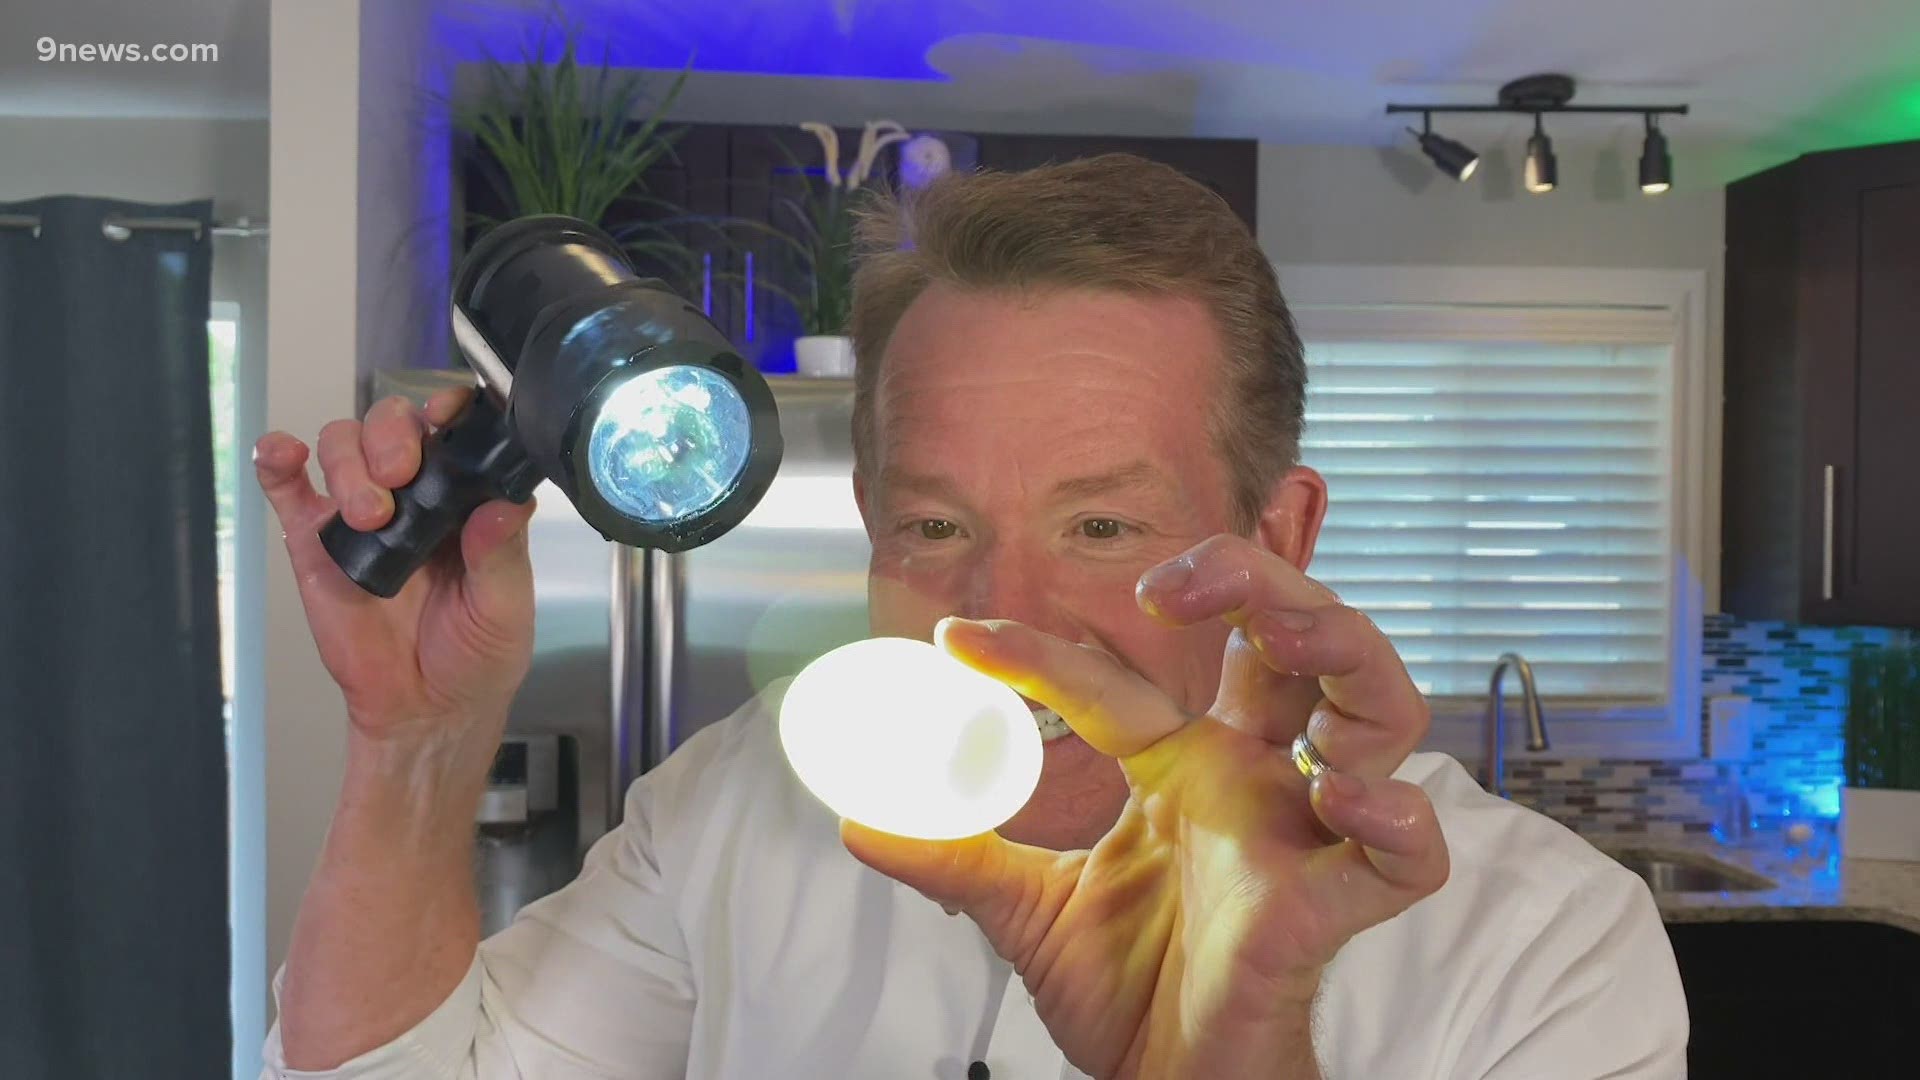 Steve Spangler shows us how playing with our food actually lets us know more about the chemistry of eggs.